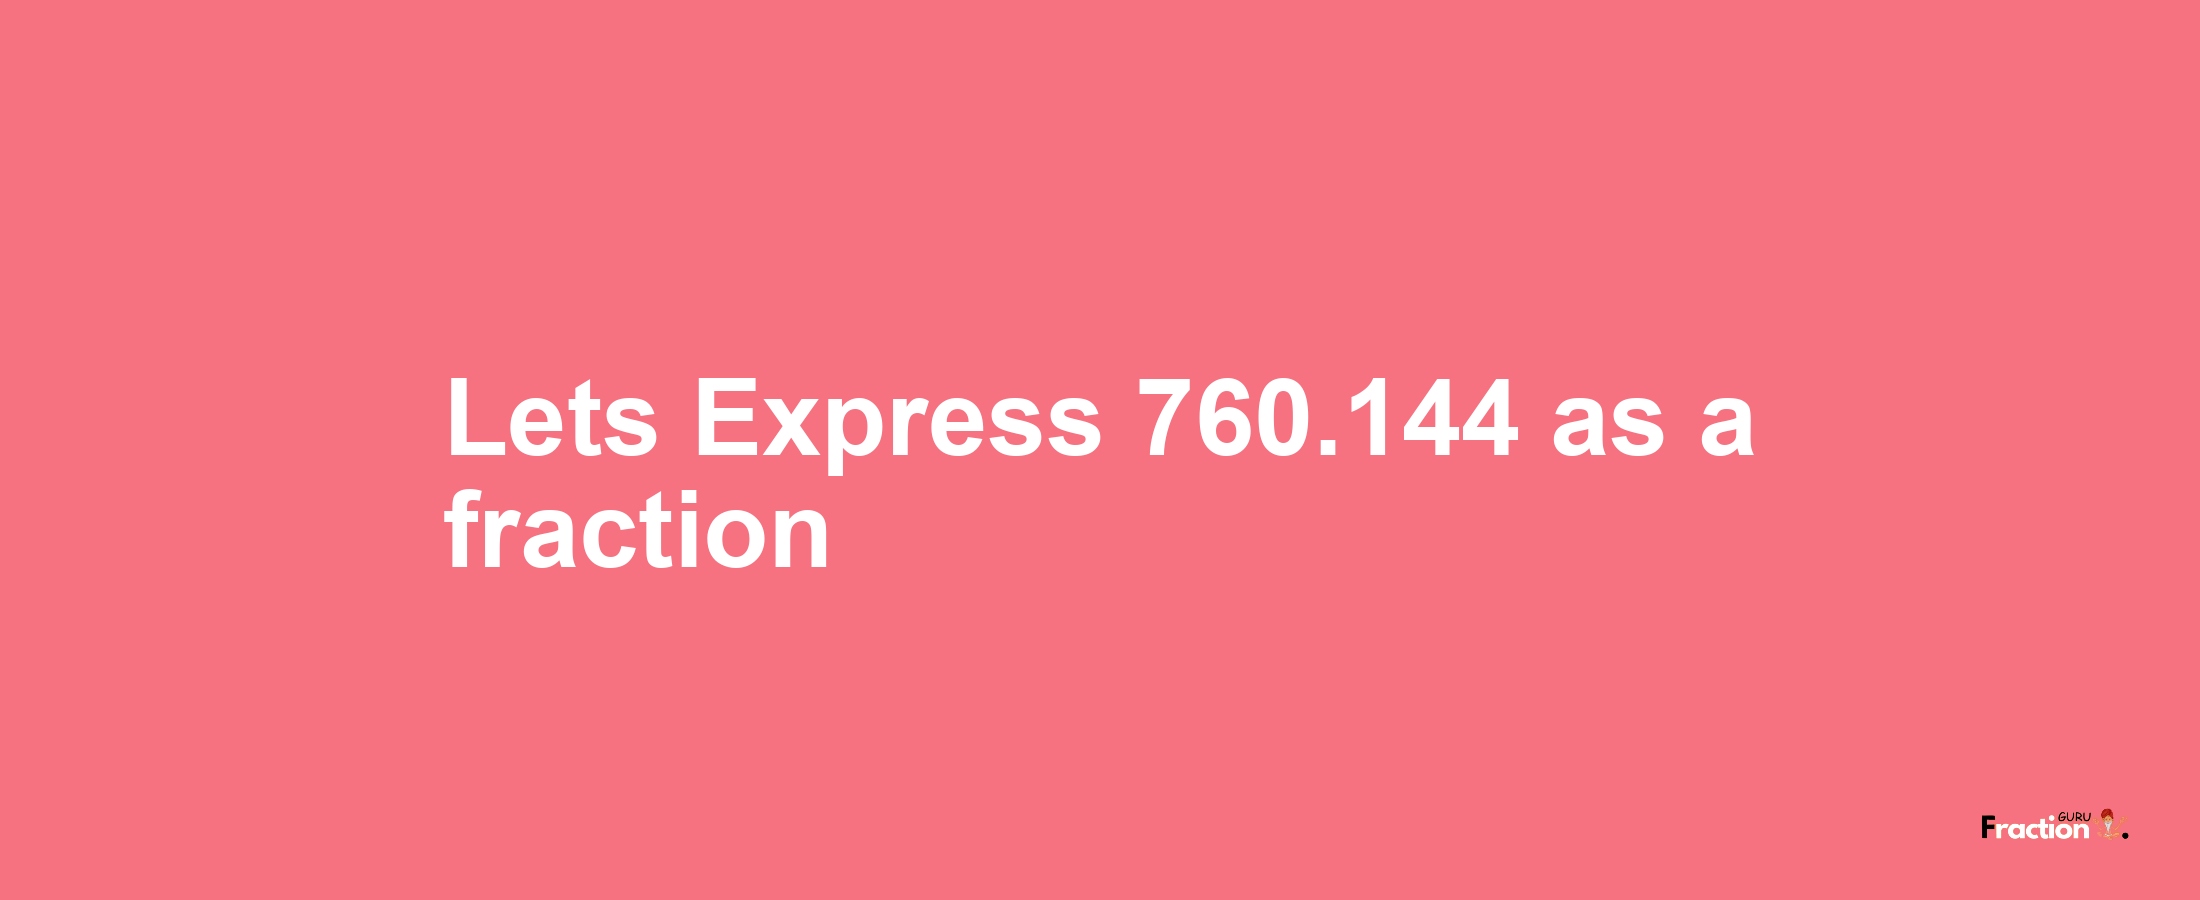 Lets Express 760.144 as afraction